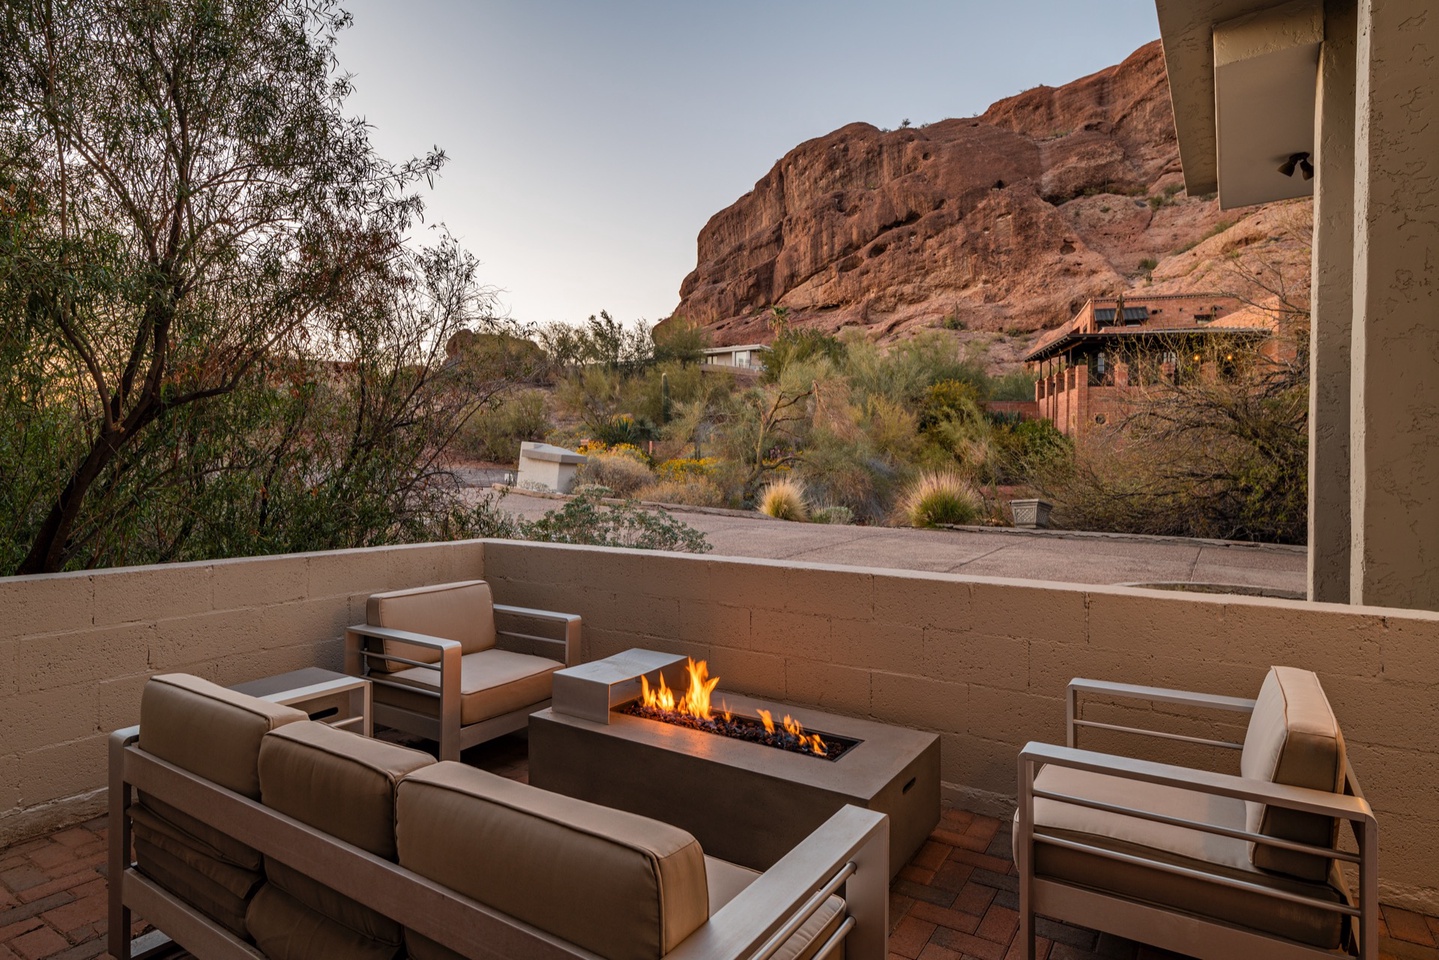 Patio area with additional fire-pit and view